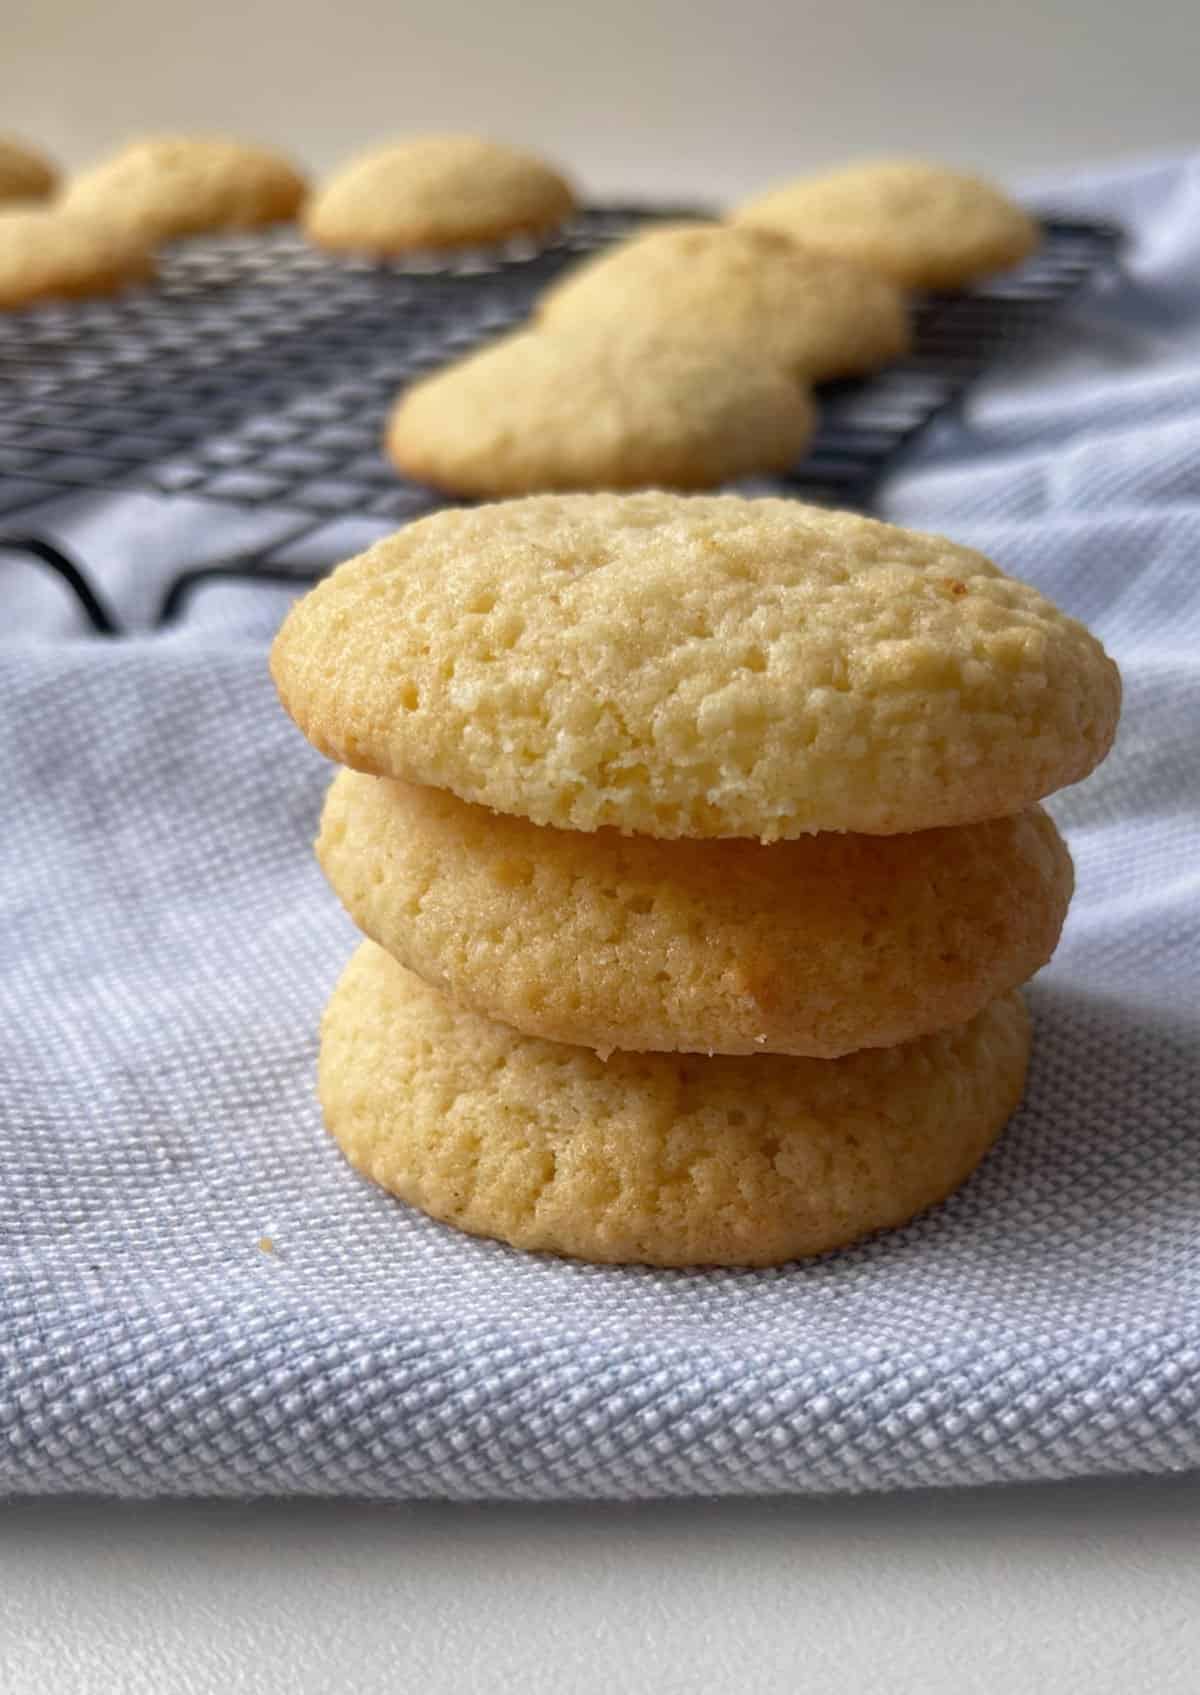 Side view of three coconut biscuits stacked on top of each other.